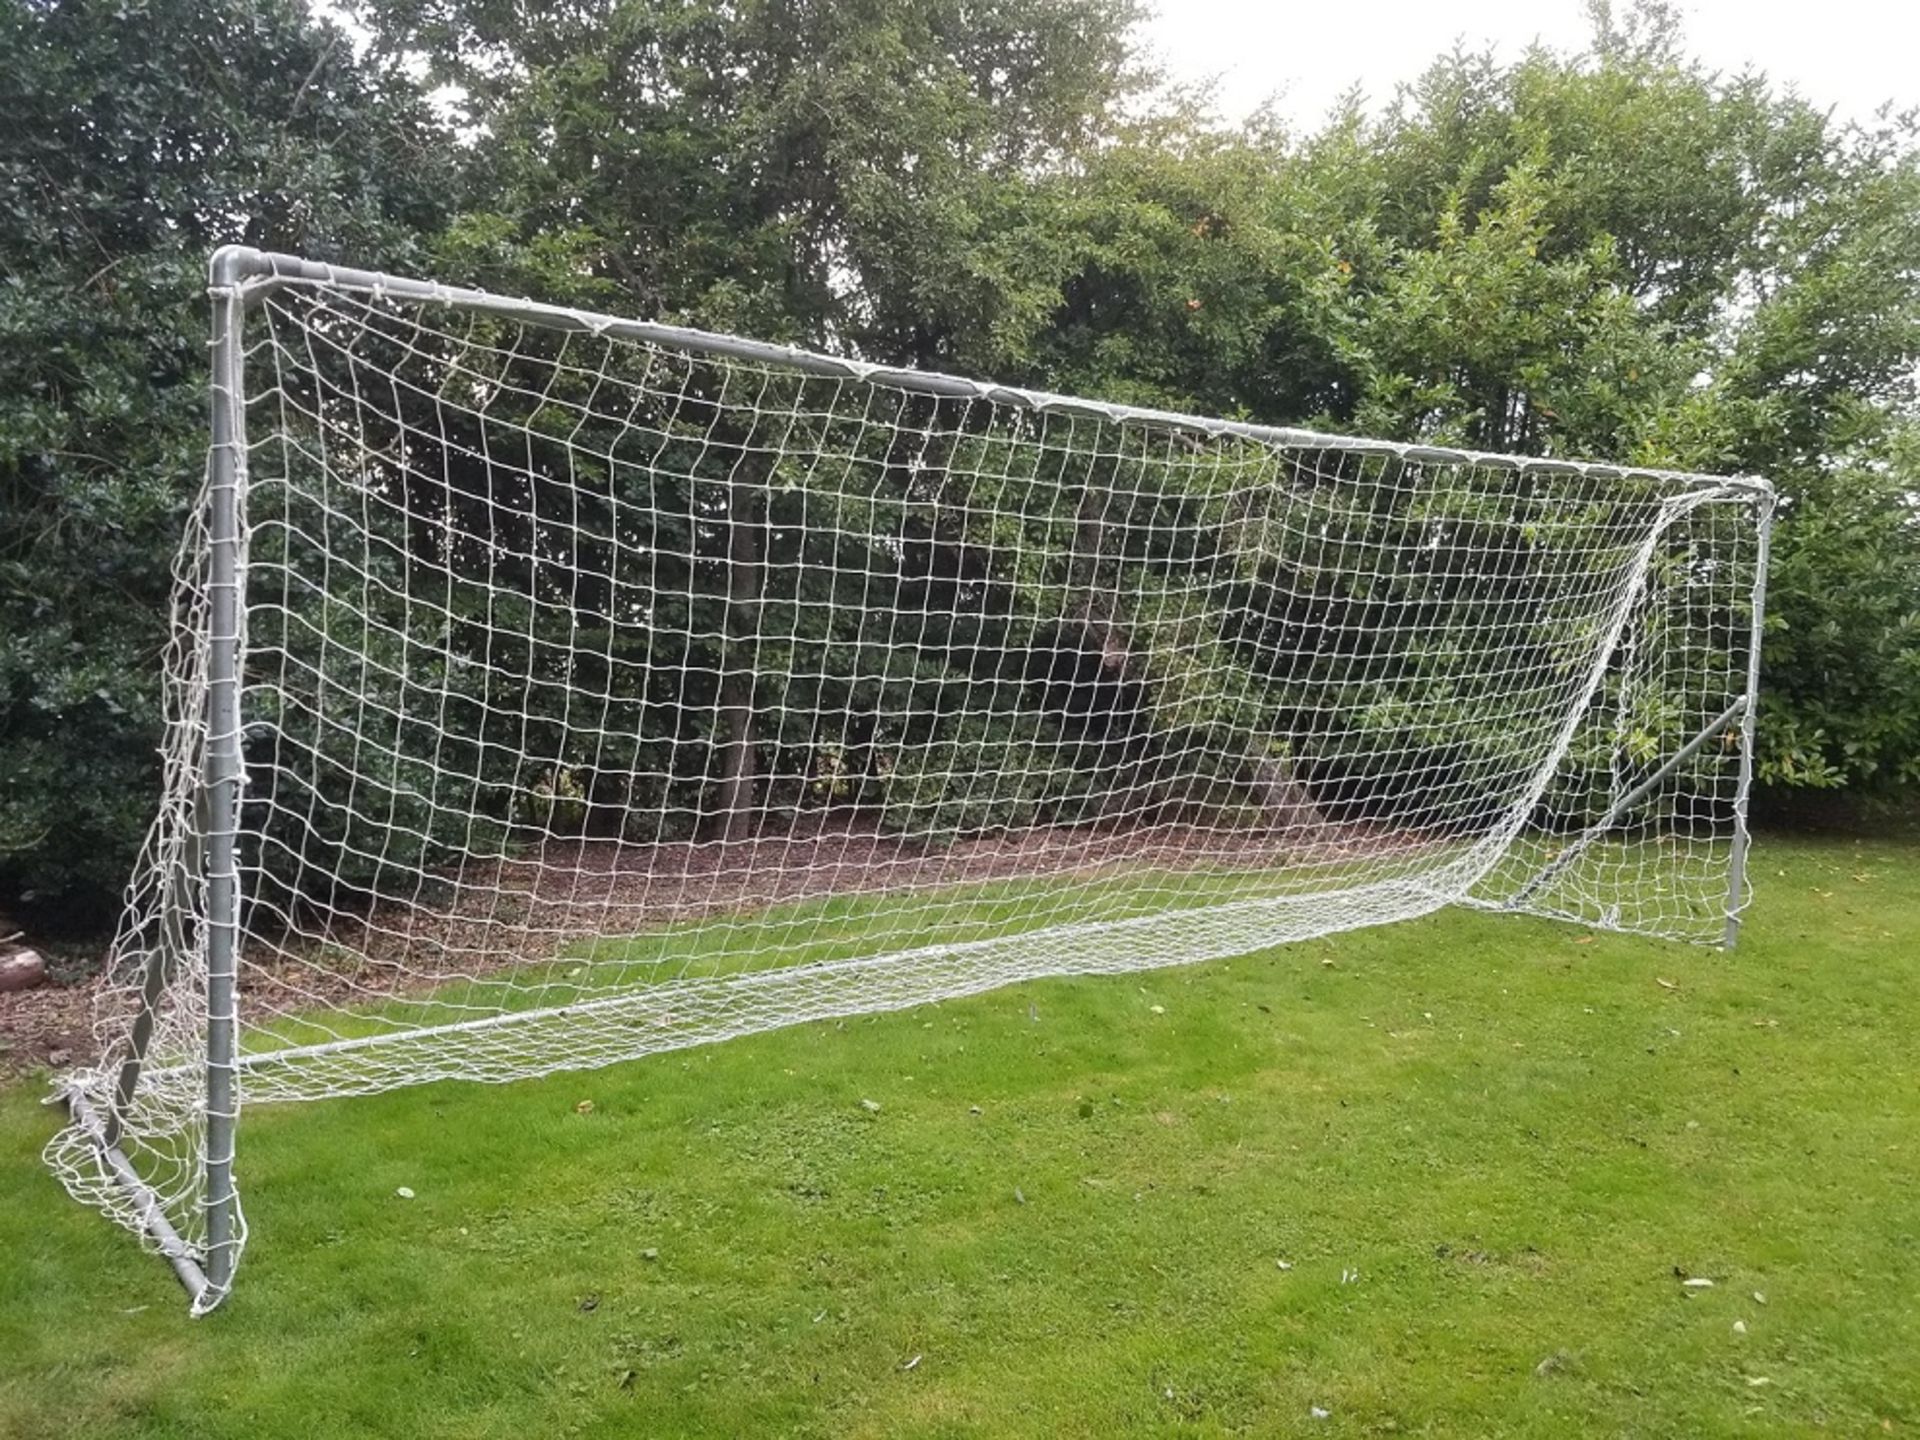 Full size heavy weight football goal 24ft x 8ft with professional net